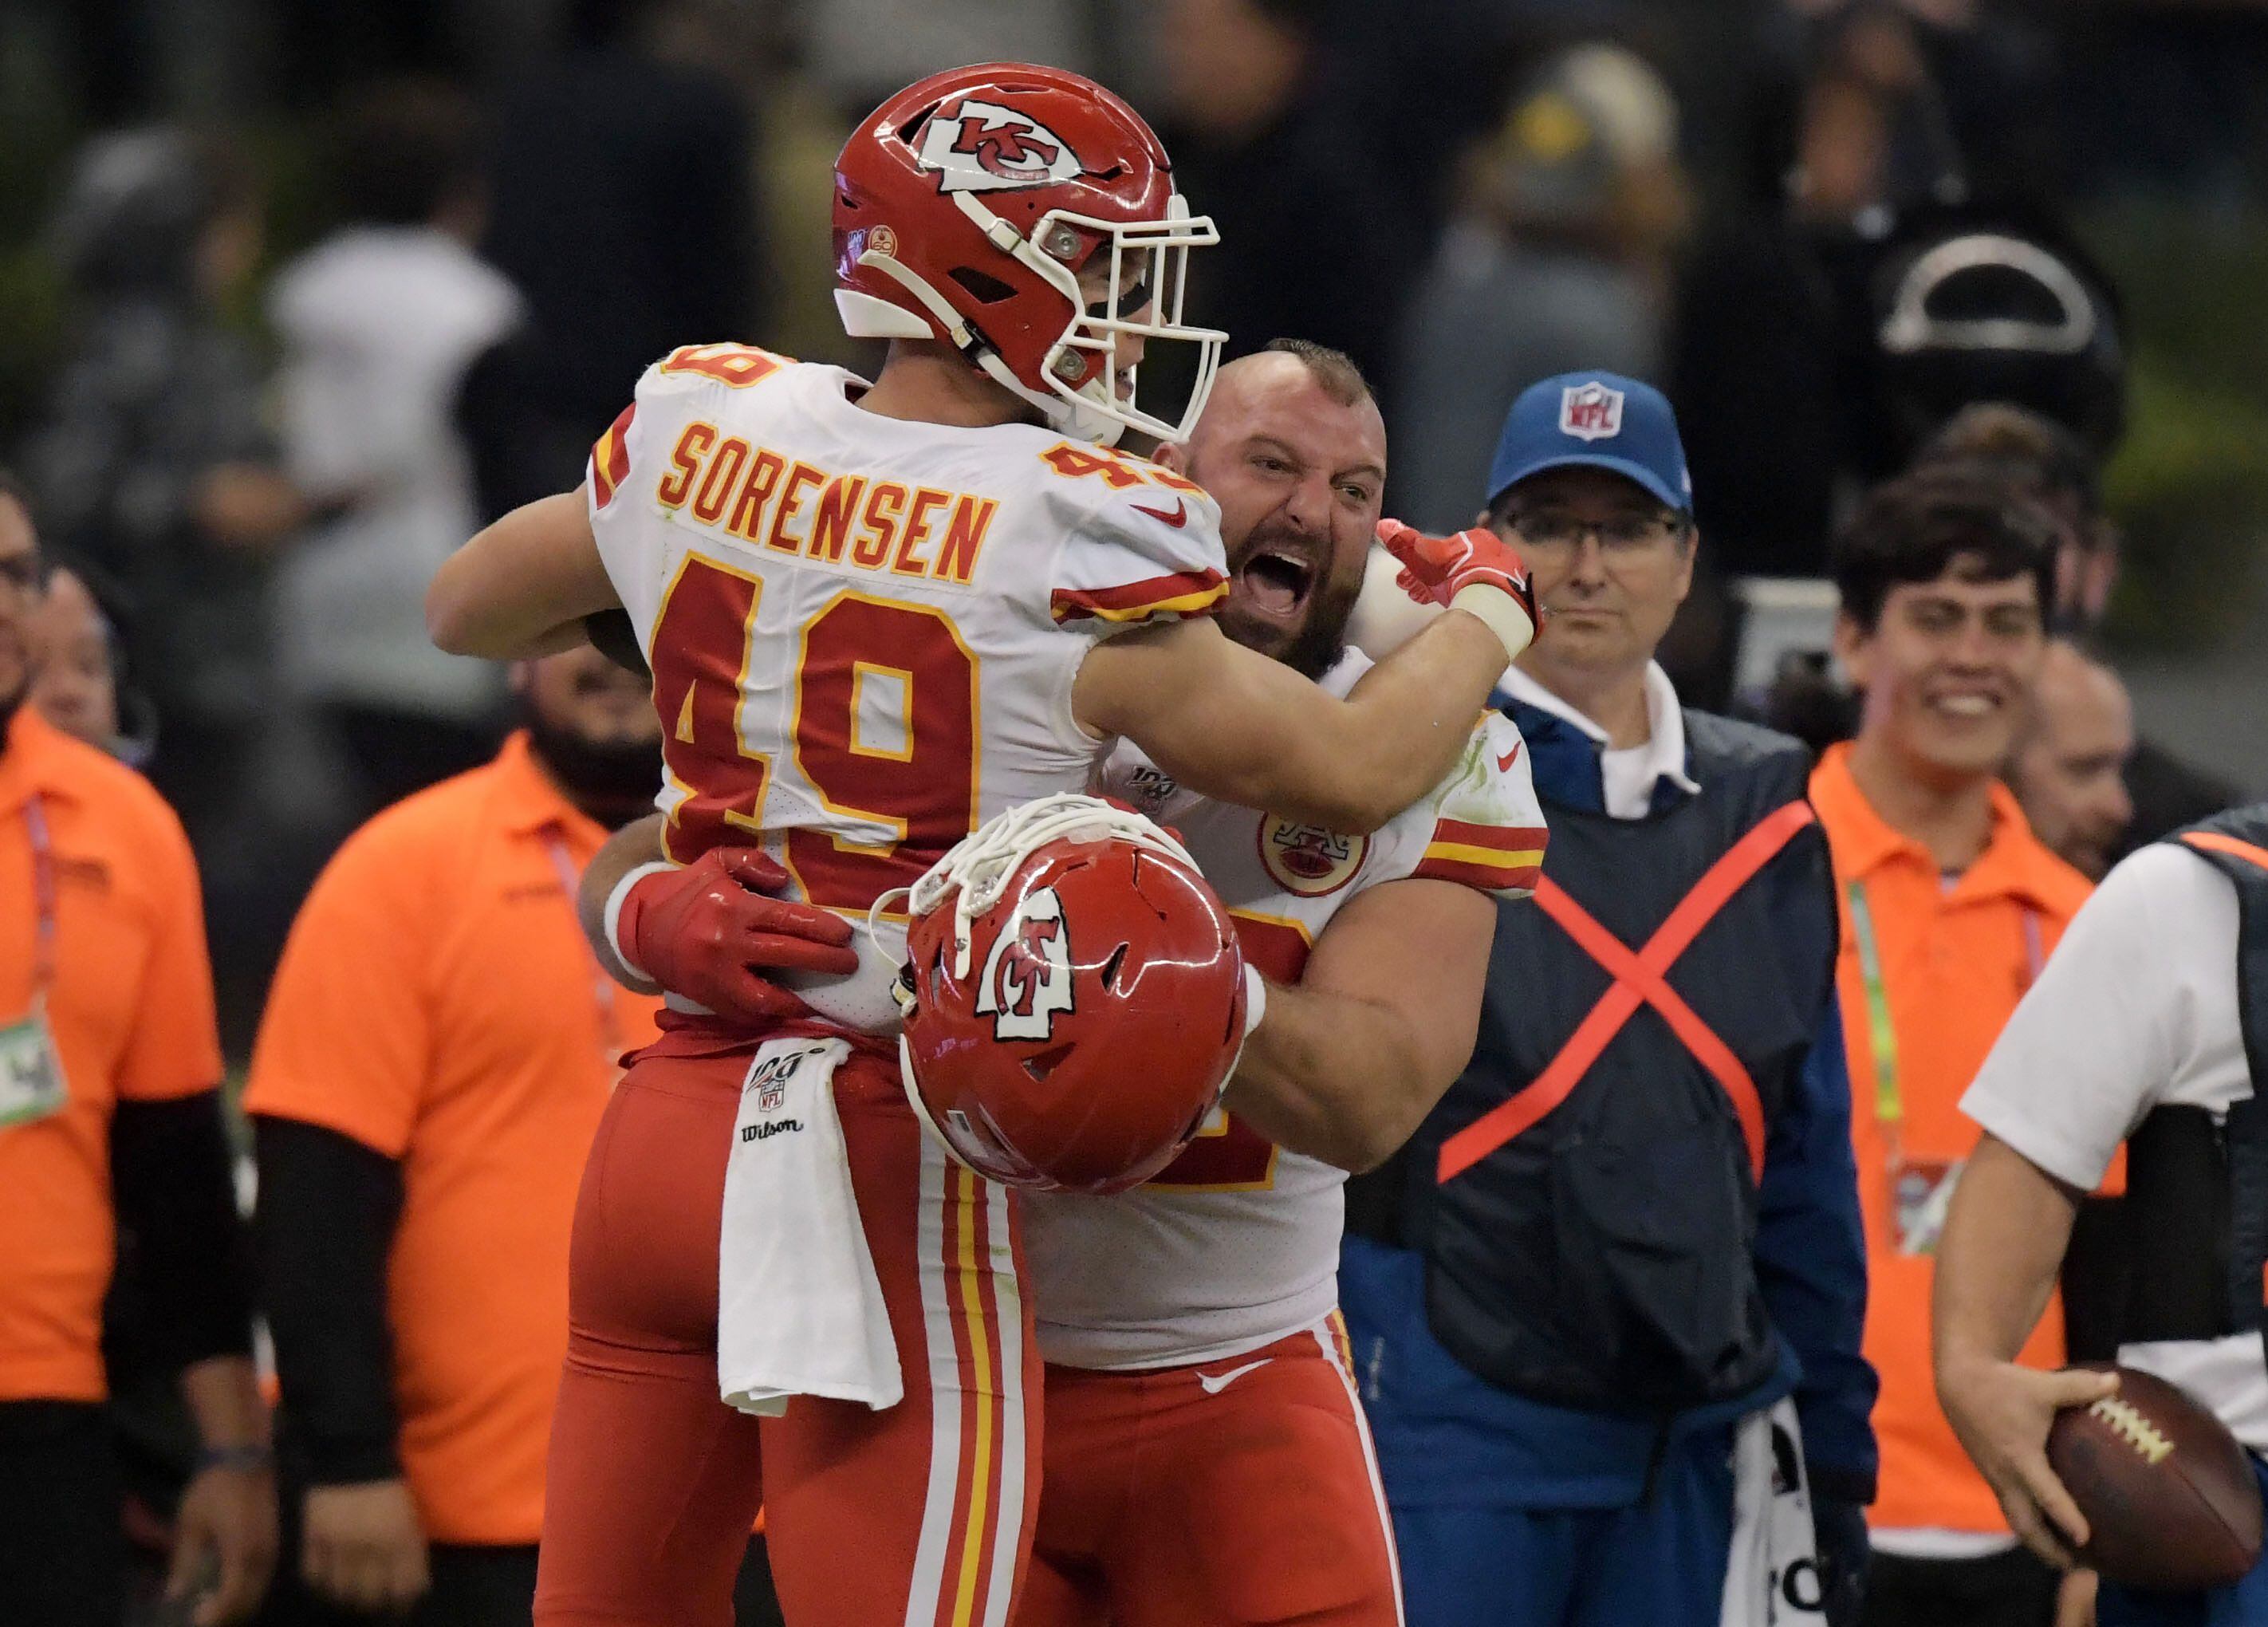 Nov 18, 2019; Mexico City, MEX; Kansas City Chiefs defensive back Daniel Sorensen (49) celebrates with fullback Anthony Sherman (42) after intercepting a pass in the fourth quarter against the Los Angeles Chargers during an NFL International Series game at Estadio Azteca. The Chiefs defeated the Chargers 24-17. Mandatory Credit: Kirby Lee-USA TODAY Sports